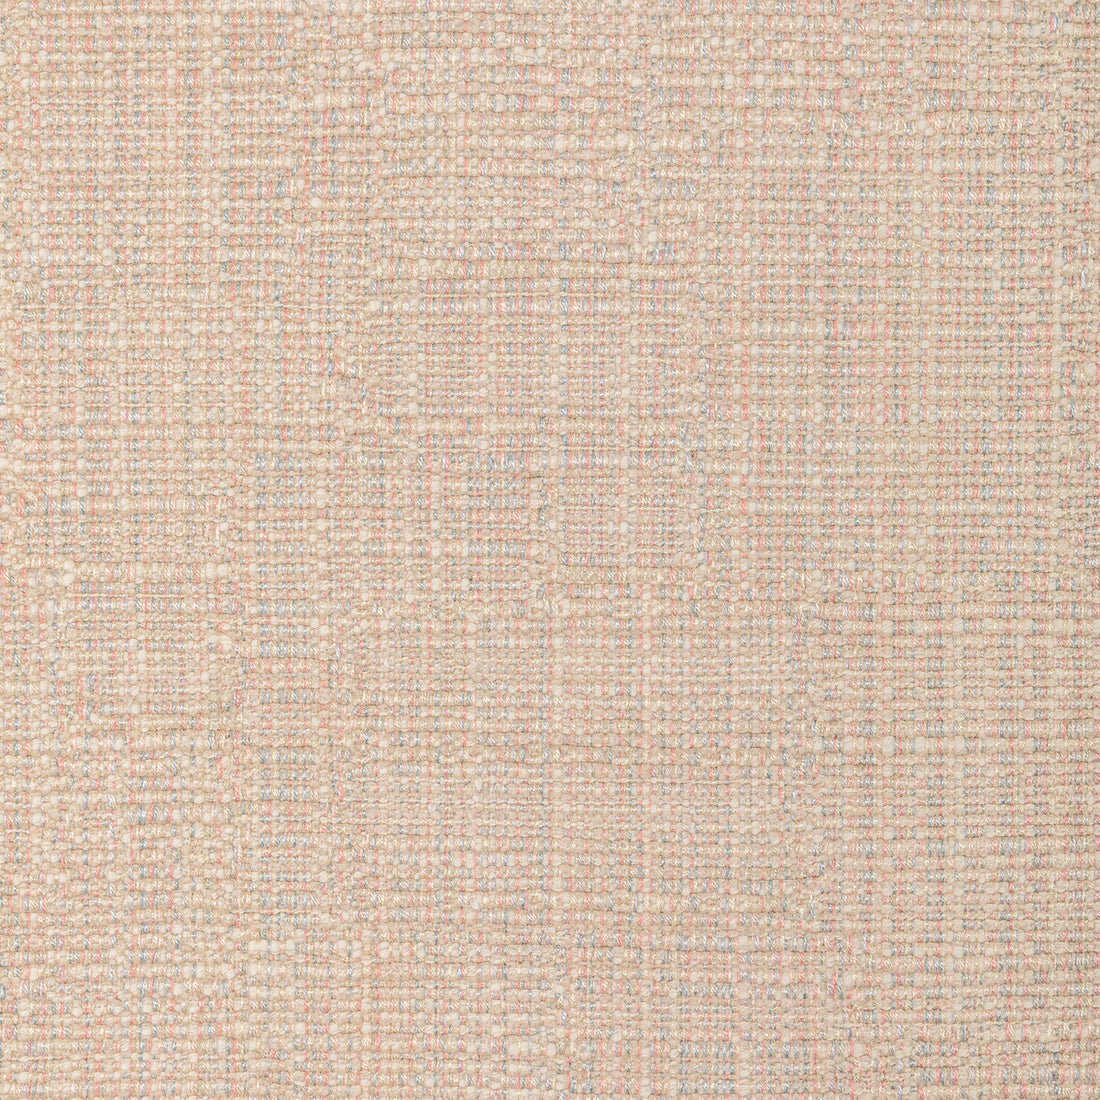 Seedbed fabric in flora color - pattern 36385.16.0 - by Kravet Couture in the Barbara Barry Ojai collection